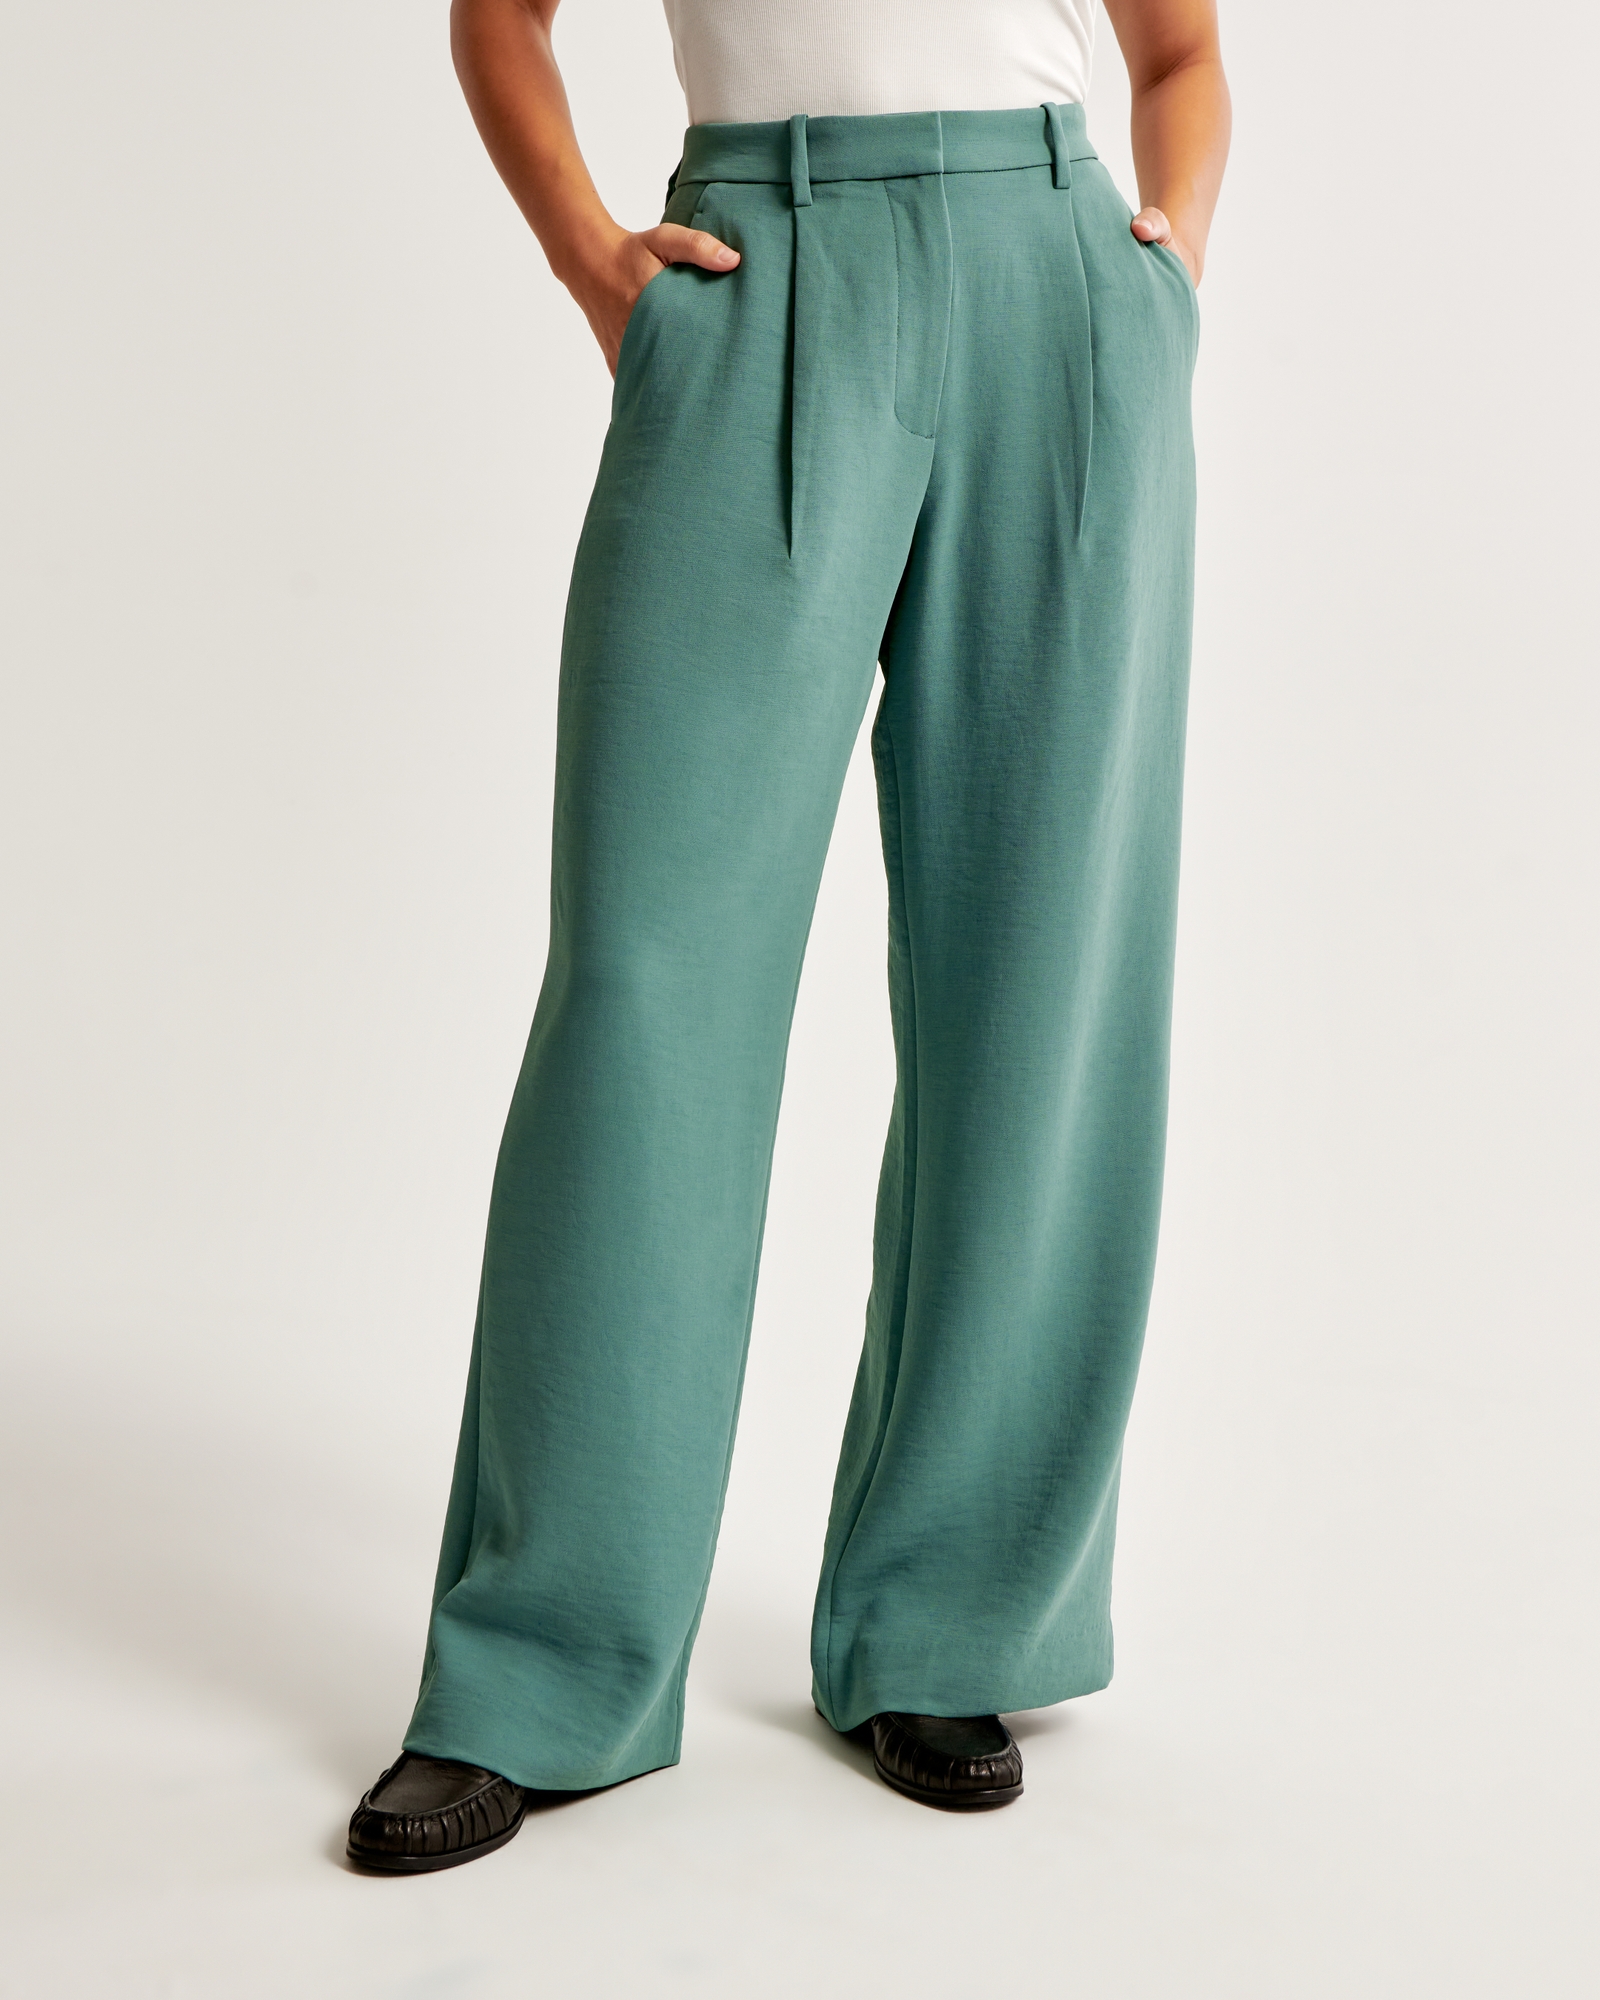 Quince Stretch Crepe Pleated Wide Leg Pant NWT Green XL